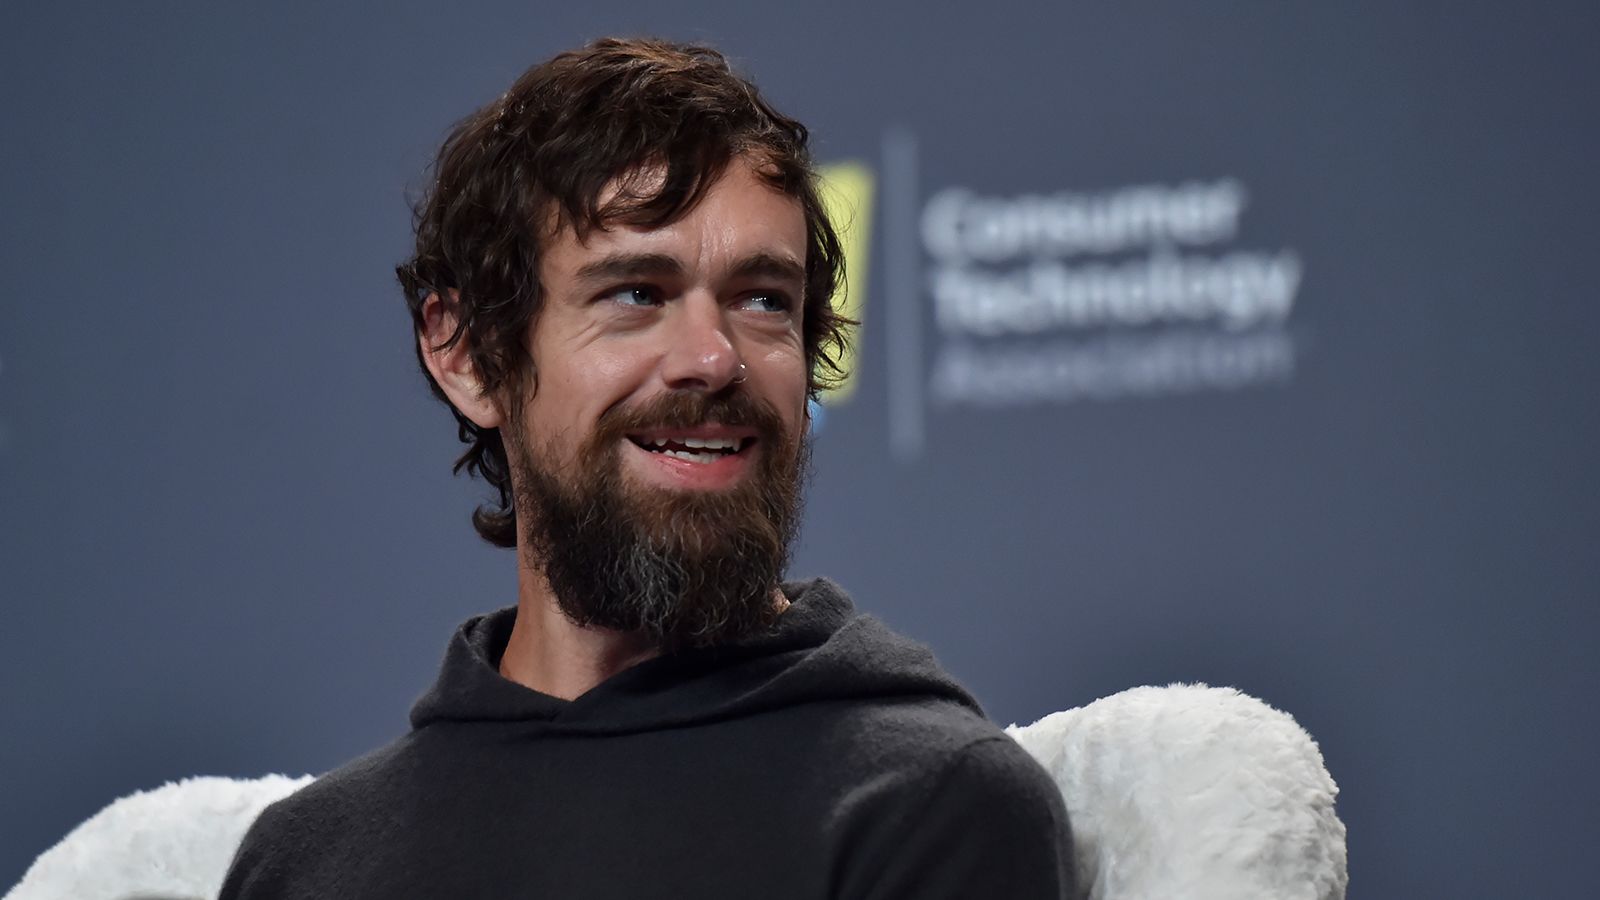 Square To Pay $39 Billion For Afterpay – channelnews